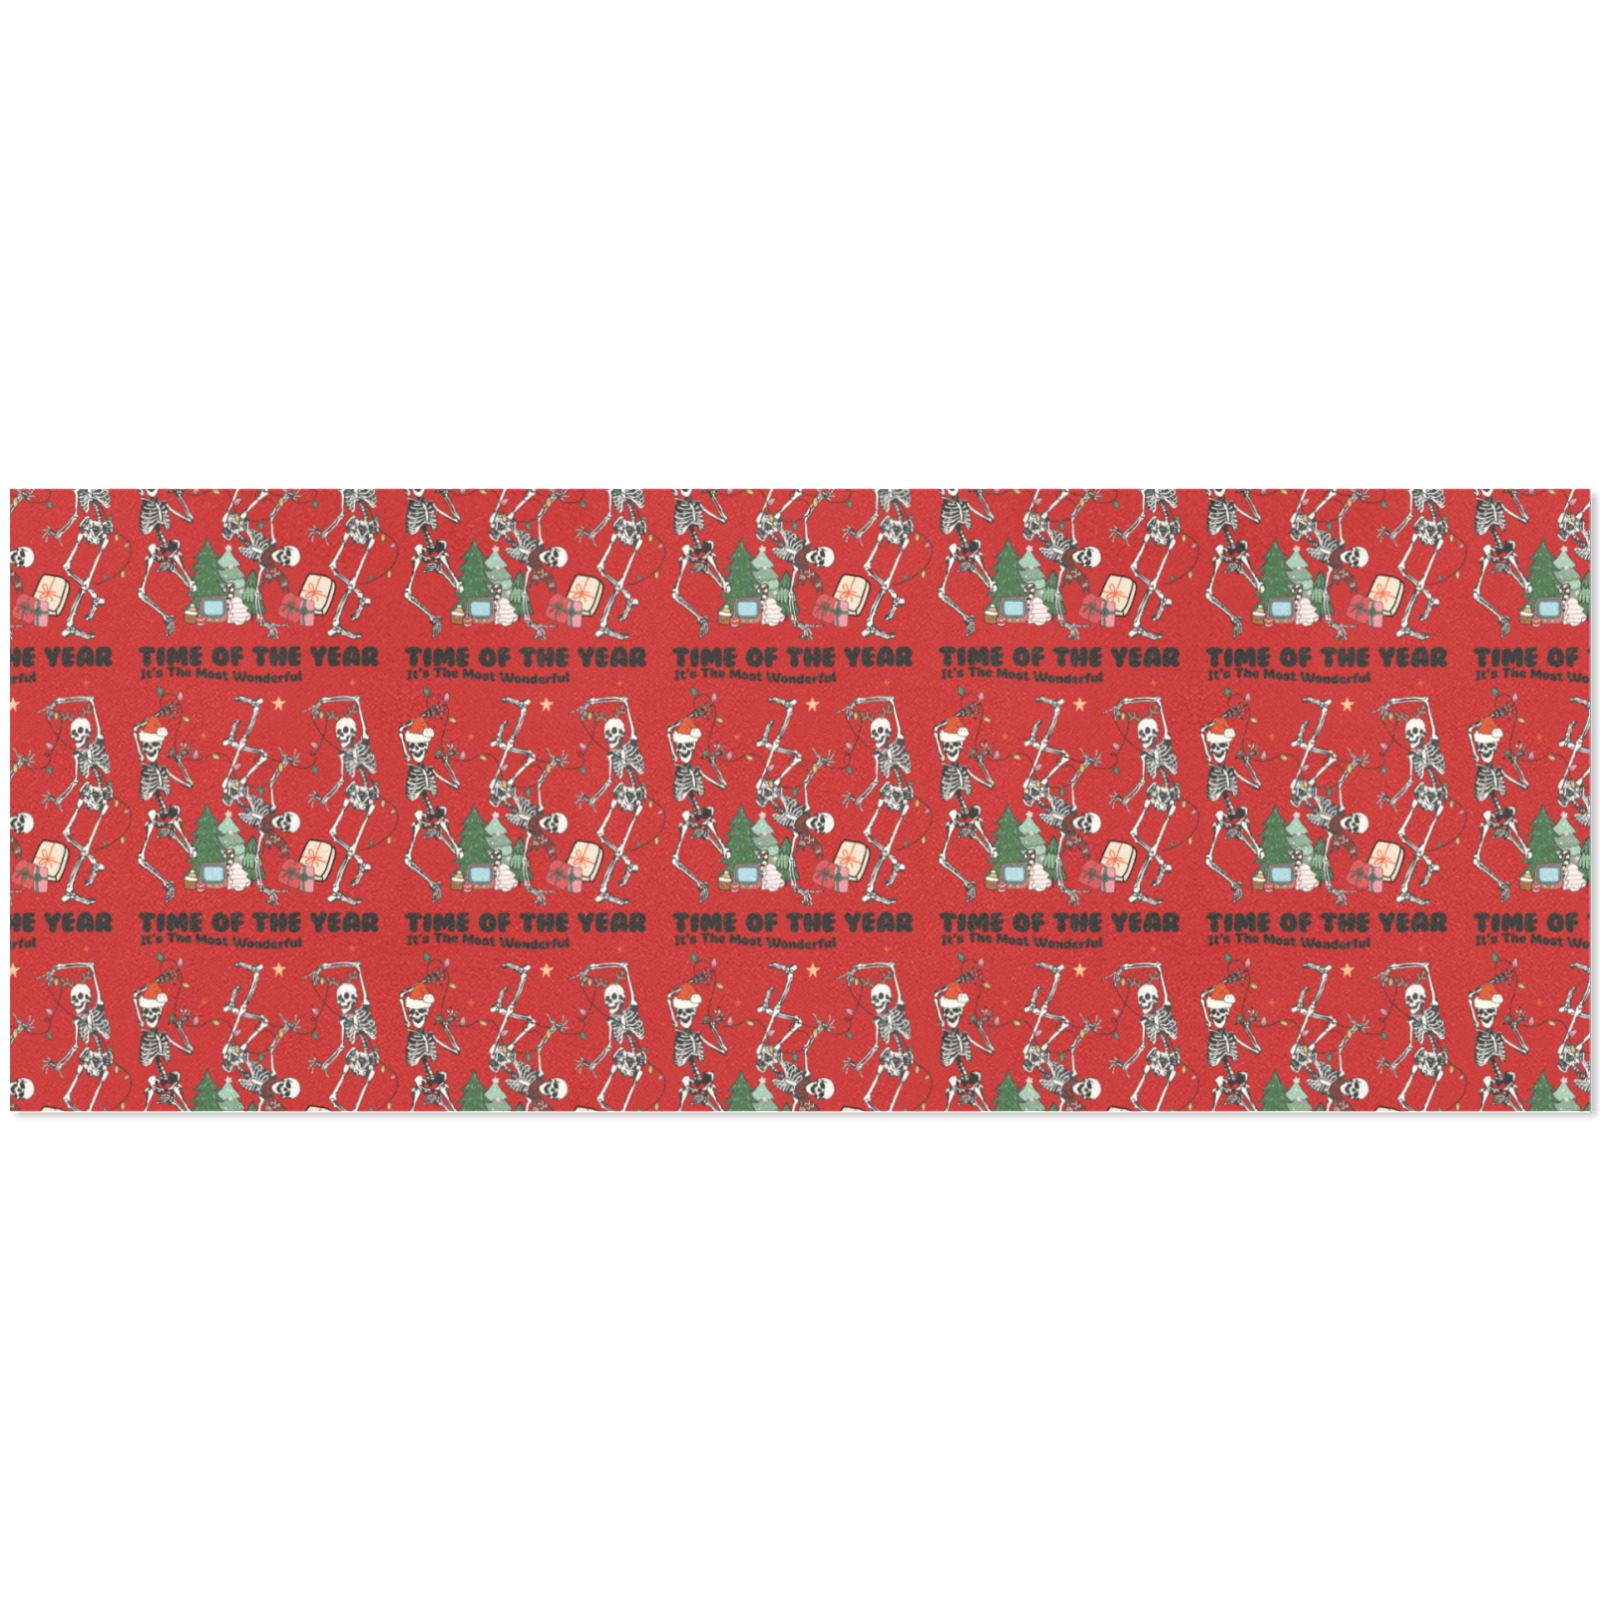 Most Wonderful Time Of The Year Skeletons (R) Gift Wrapping Paper 58"x 23" (4 Rolls)